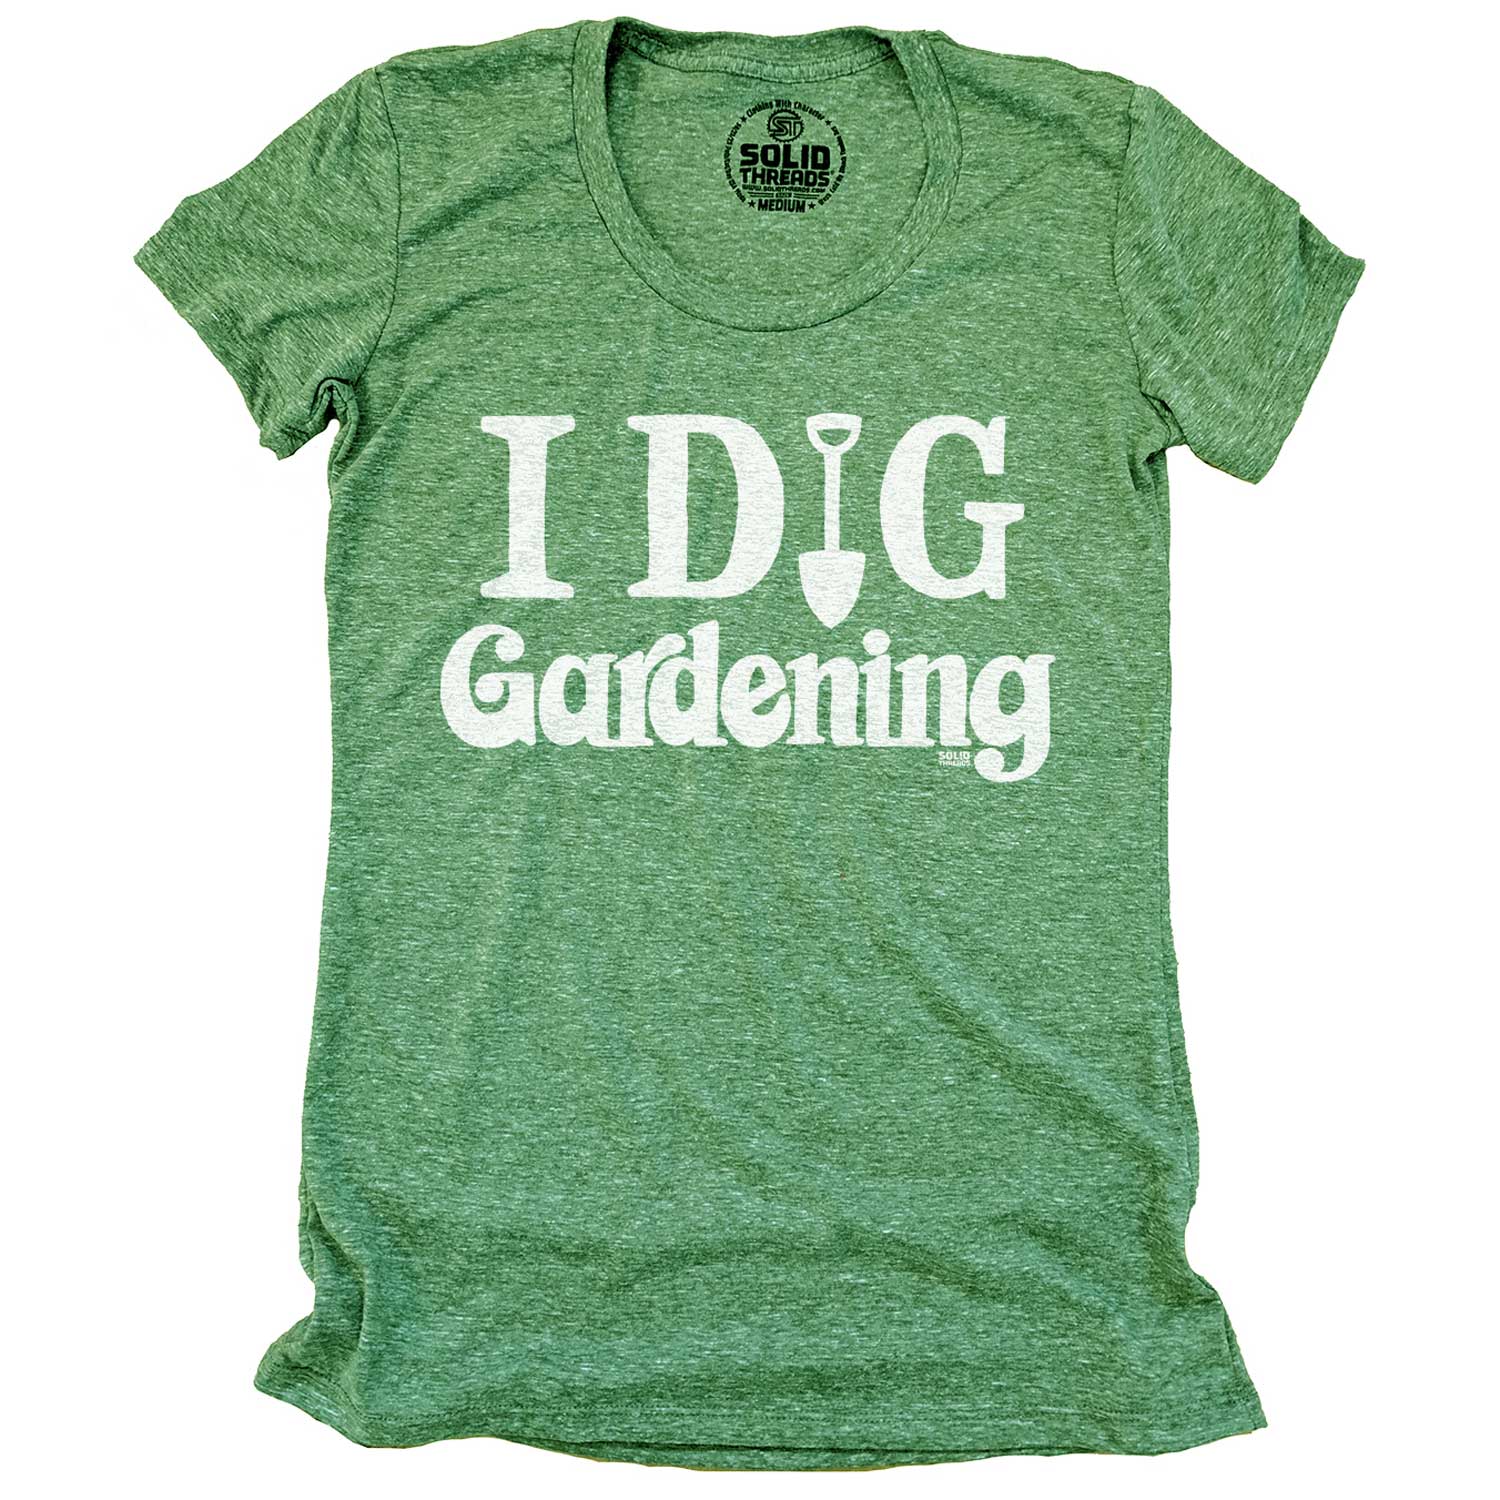 I Dig Gardening Retro Tee | Funny Plant - Solid Threads